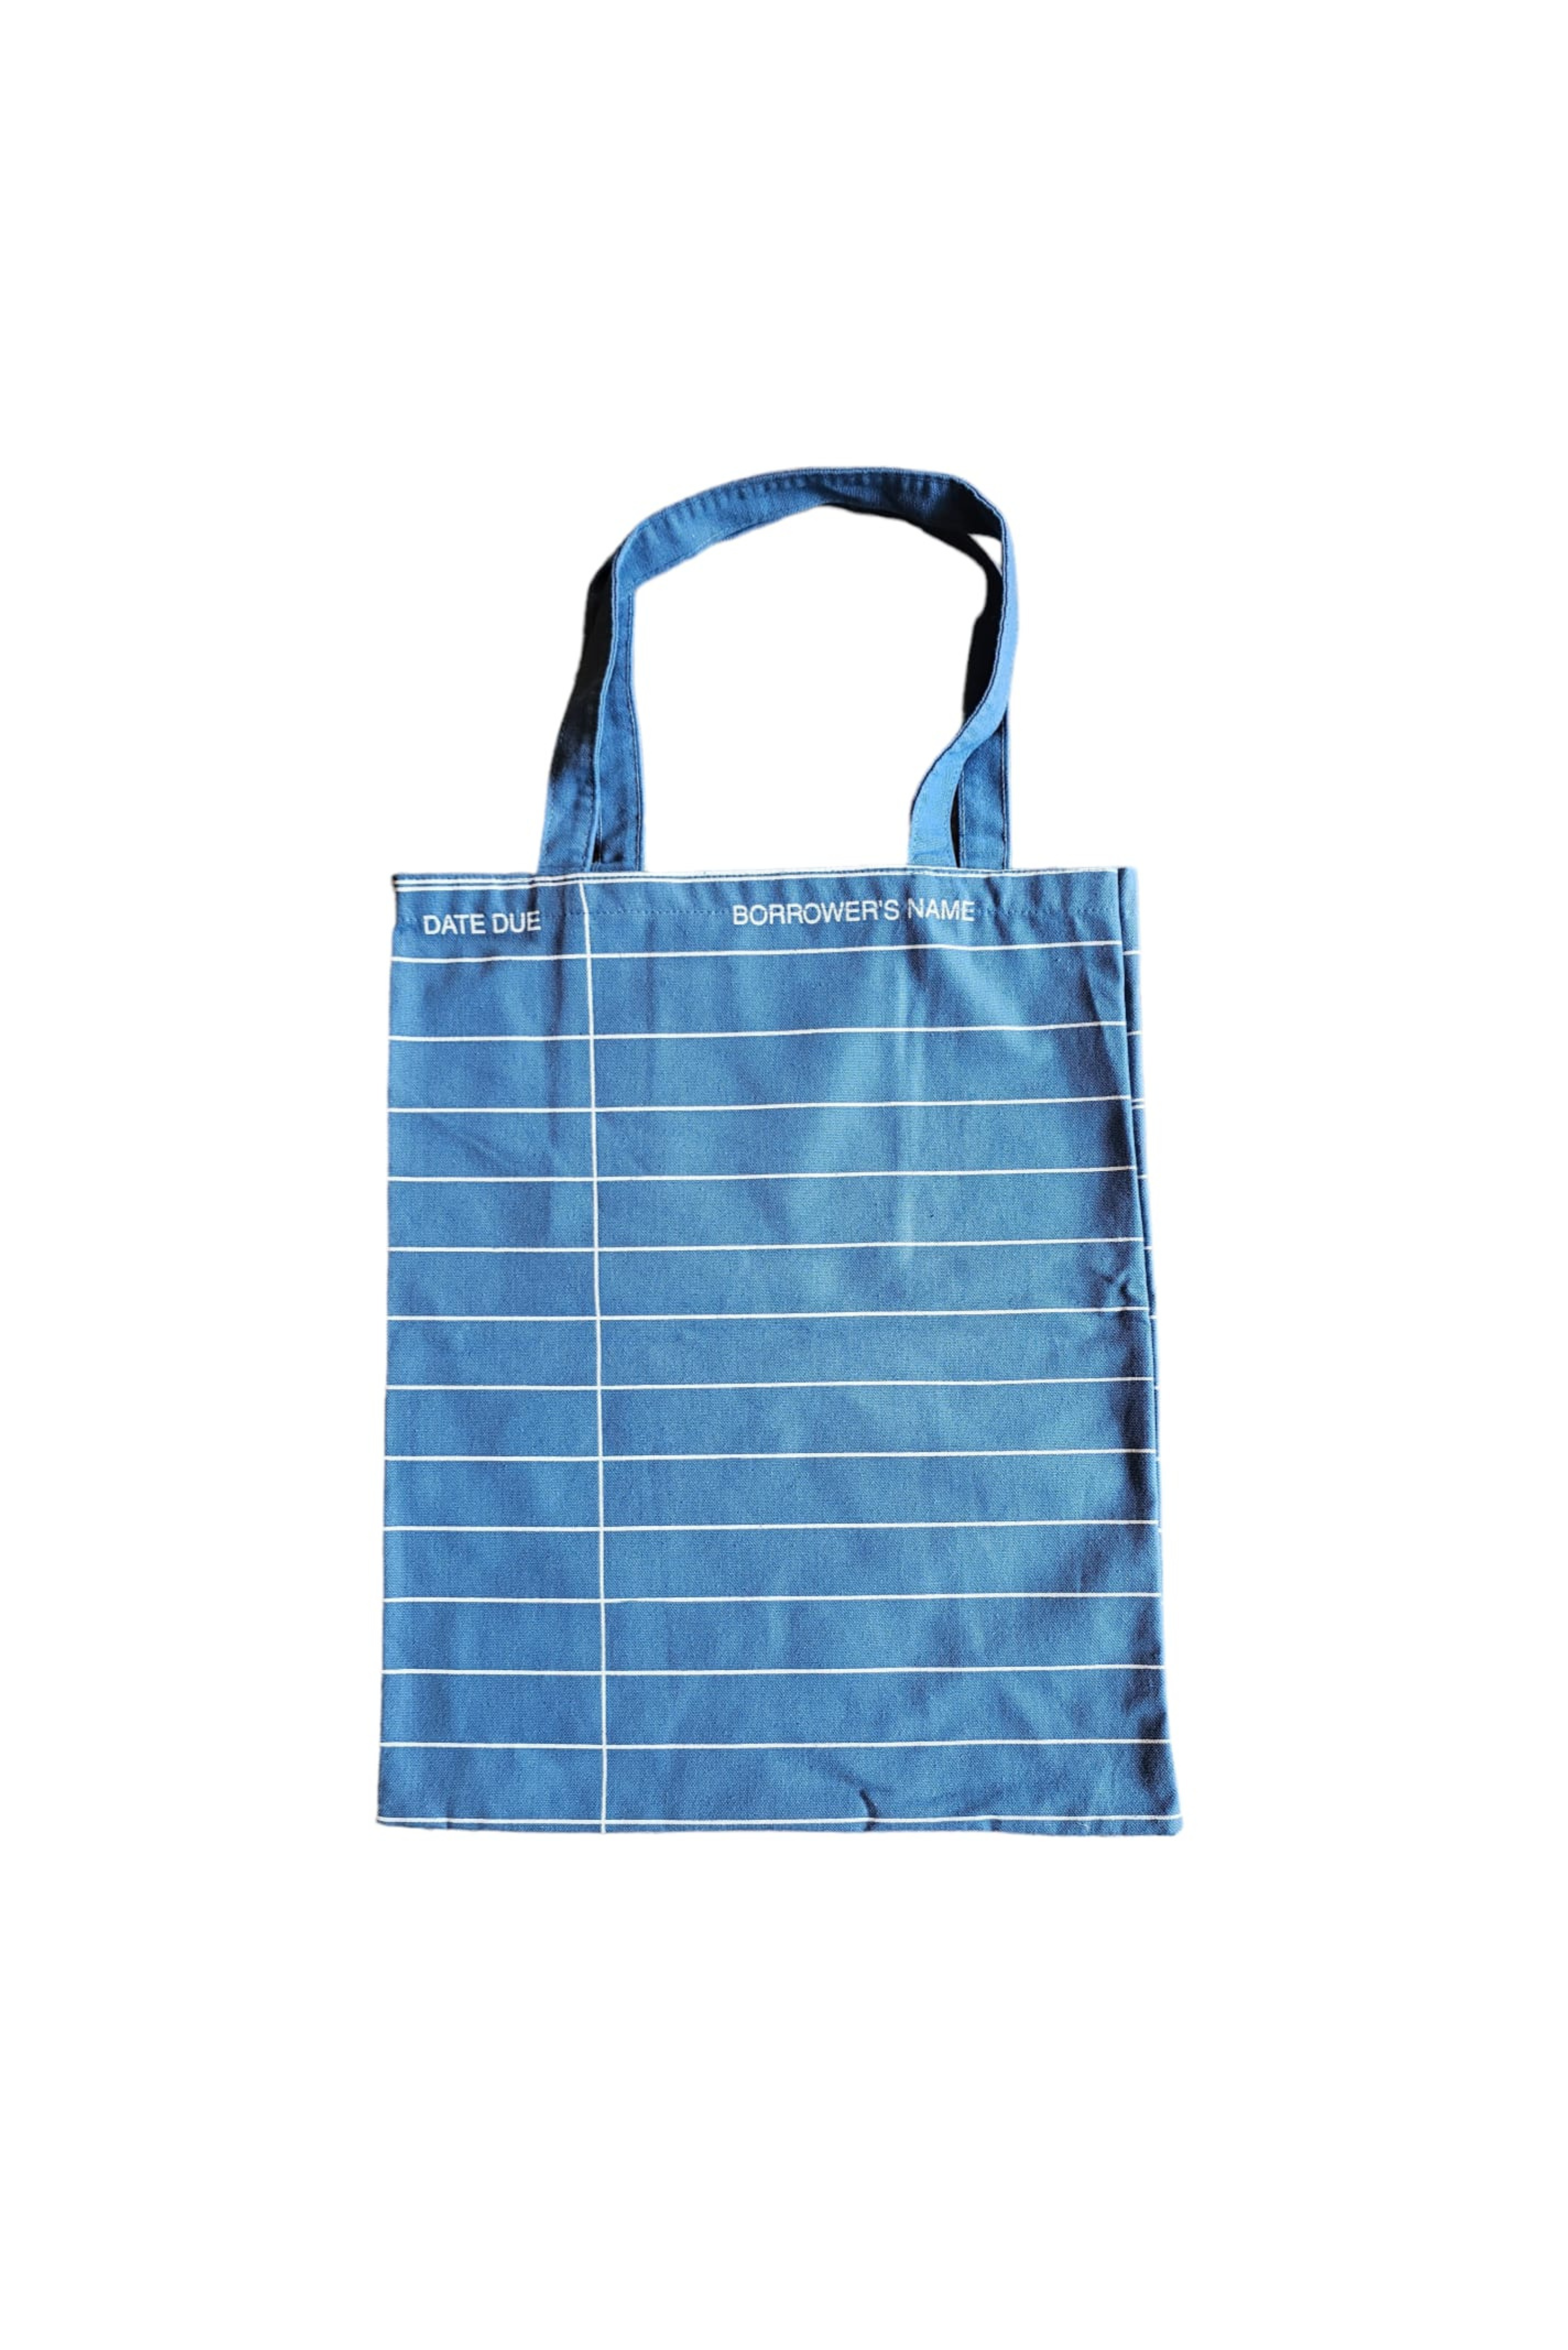 Library Loan Card Literary Tote